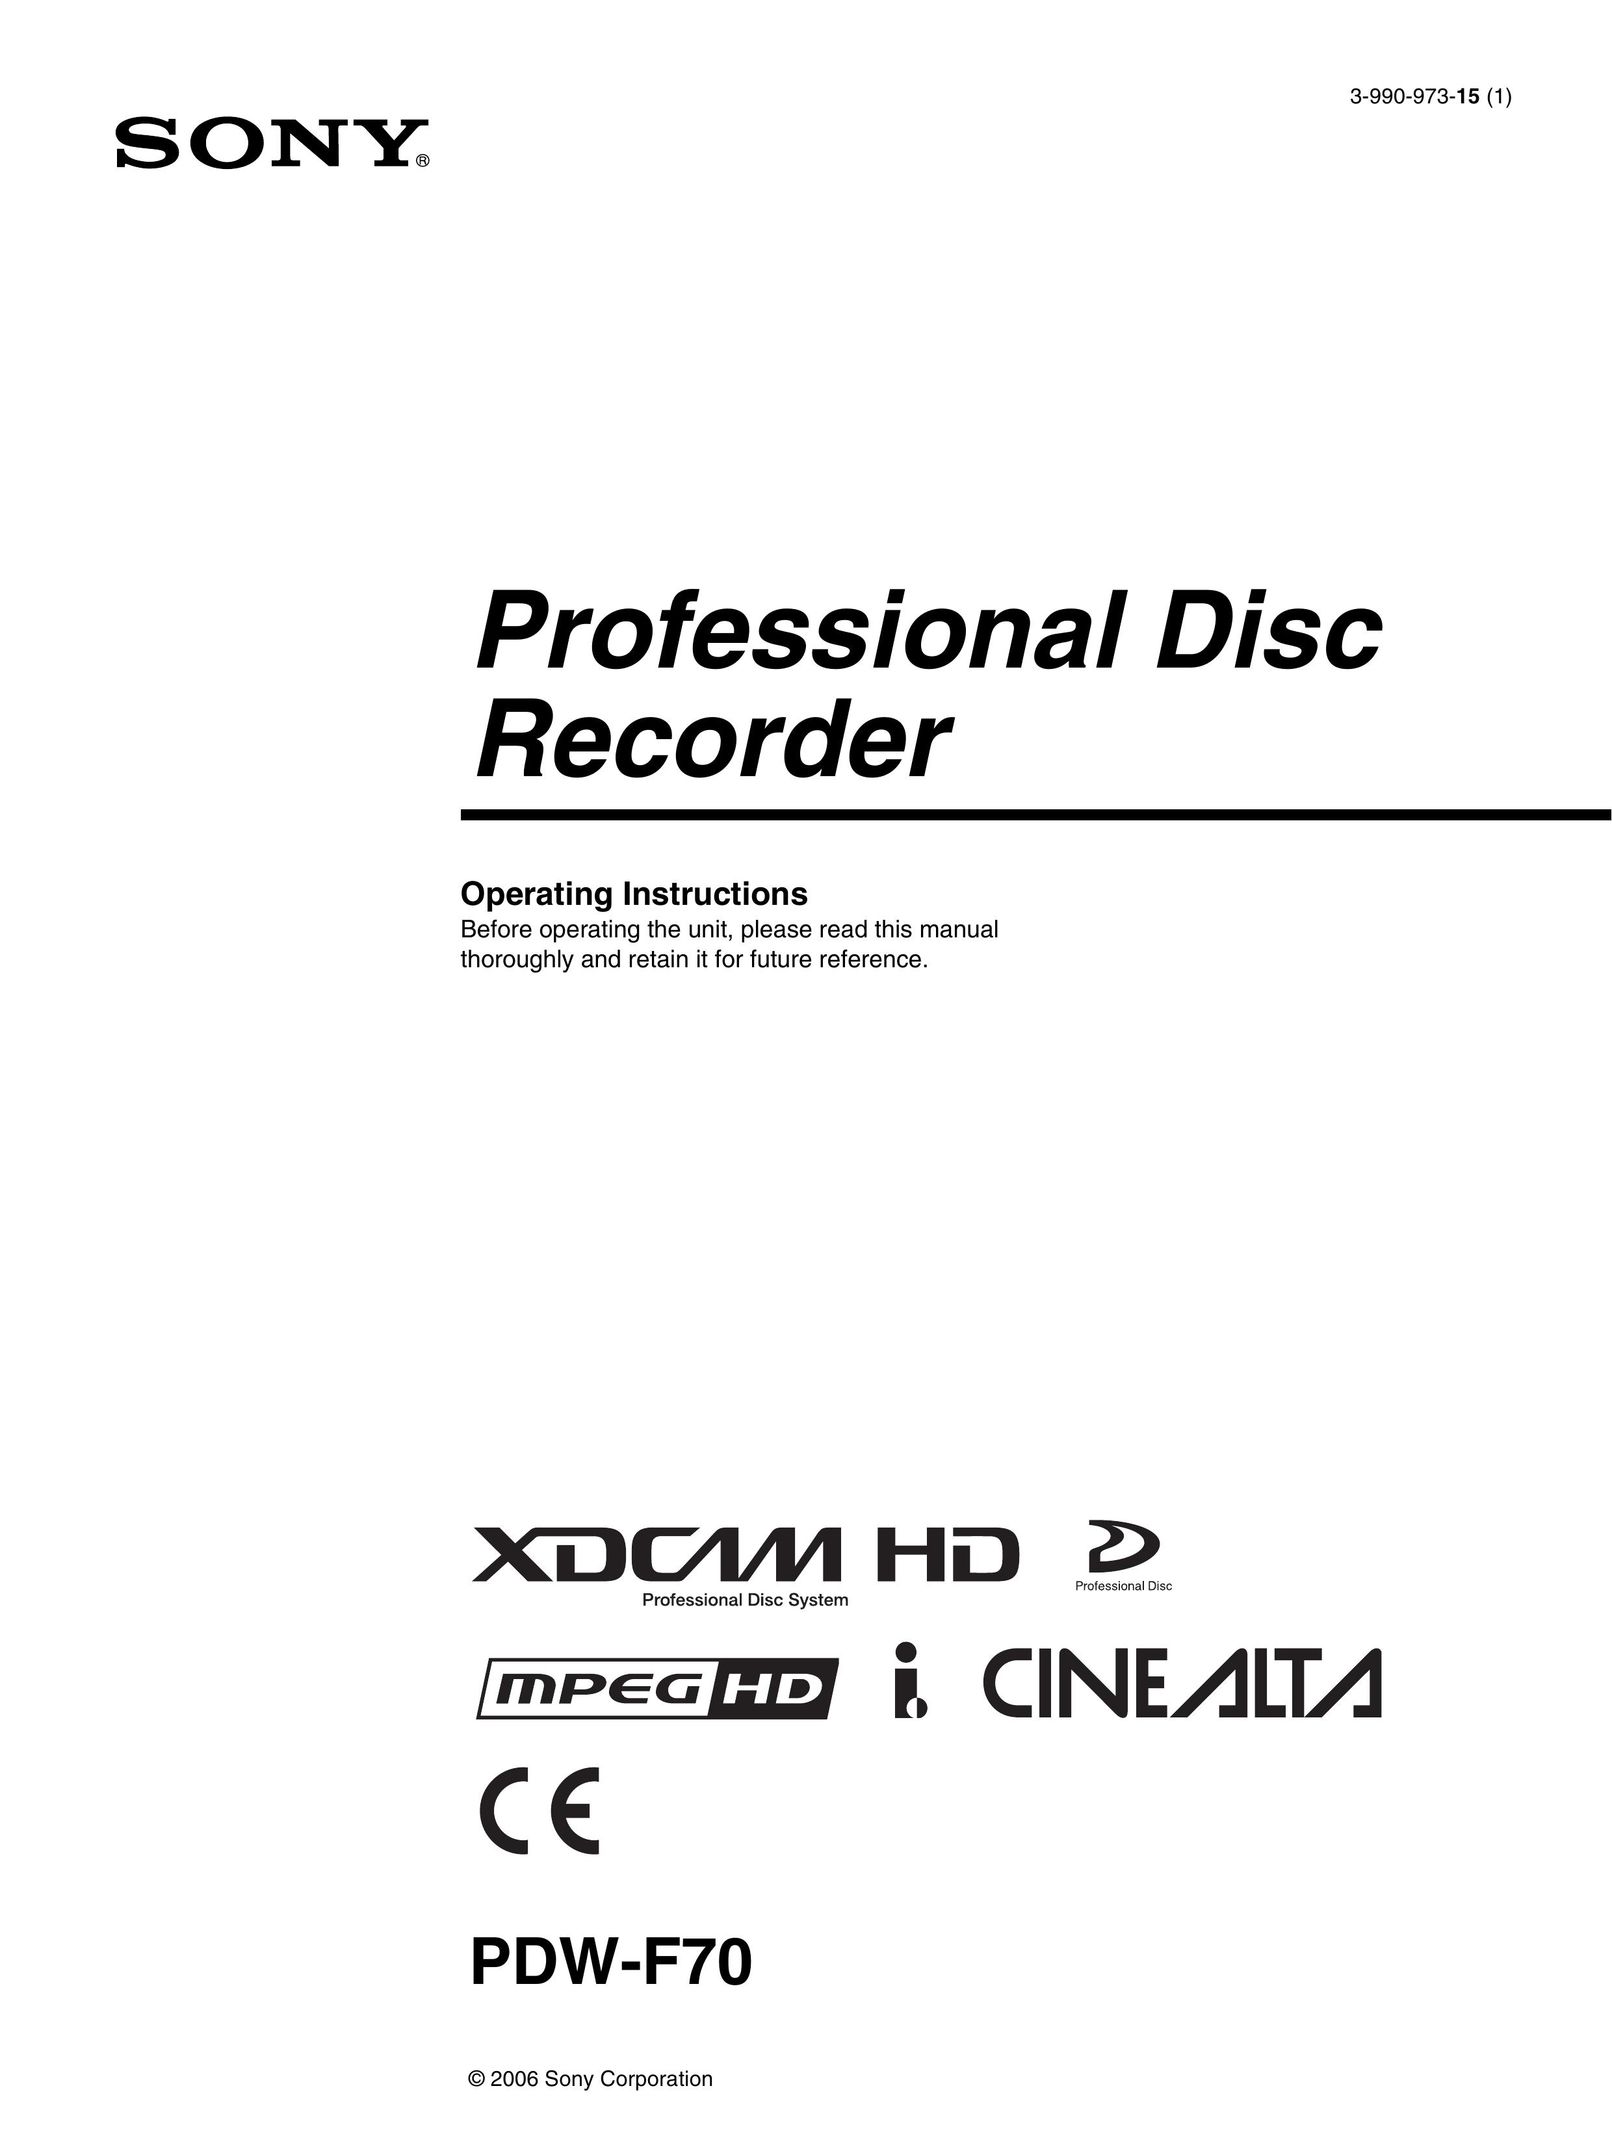 Sony PDW-F70 DVD Recorder User Manual